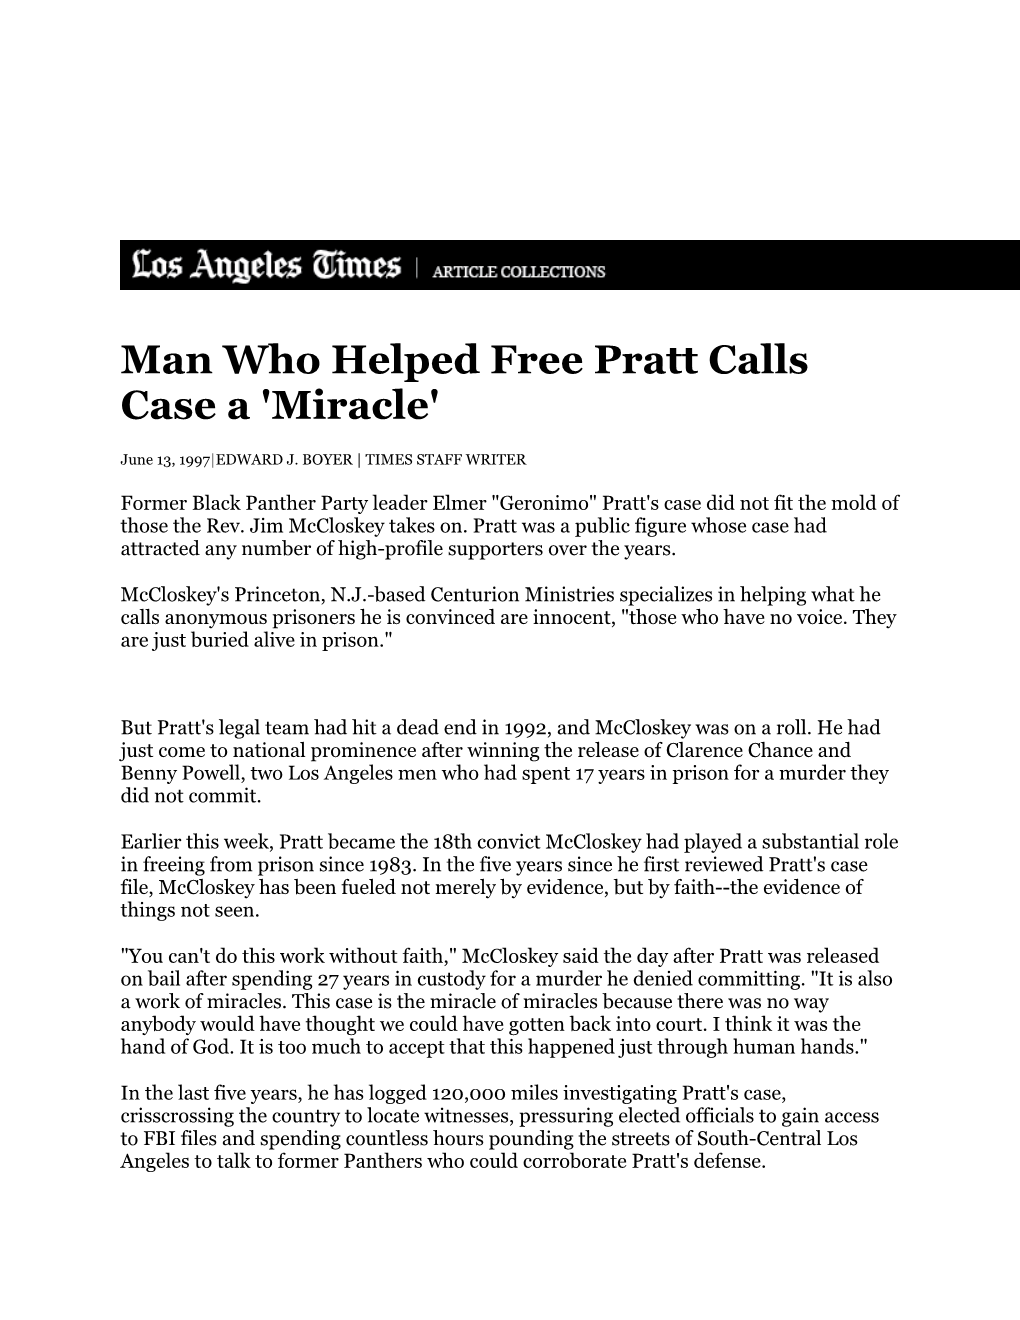 Man Who Helped Free Pratt Calls Case a 'Miracle'